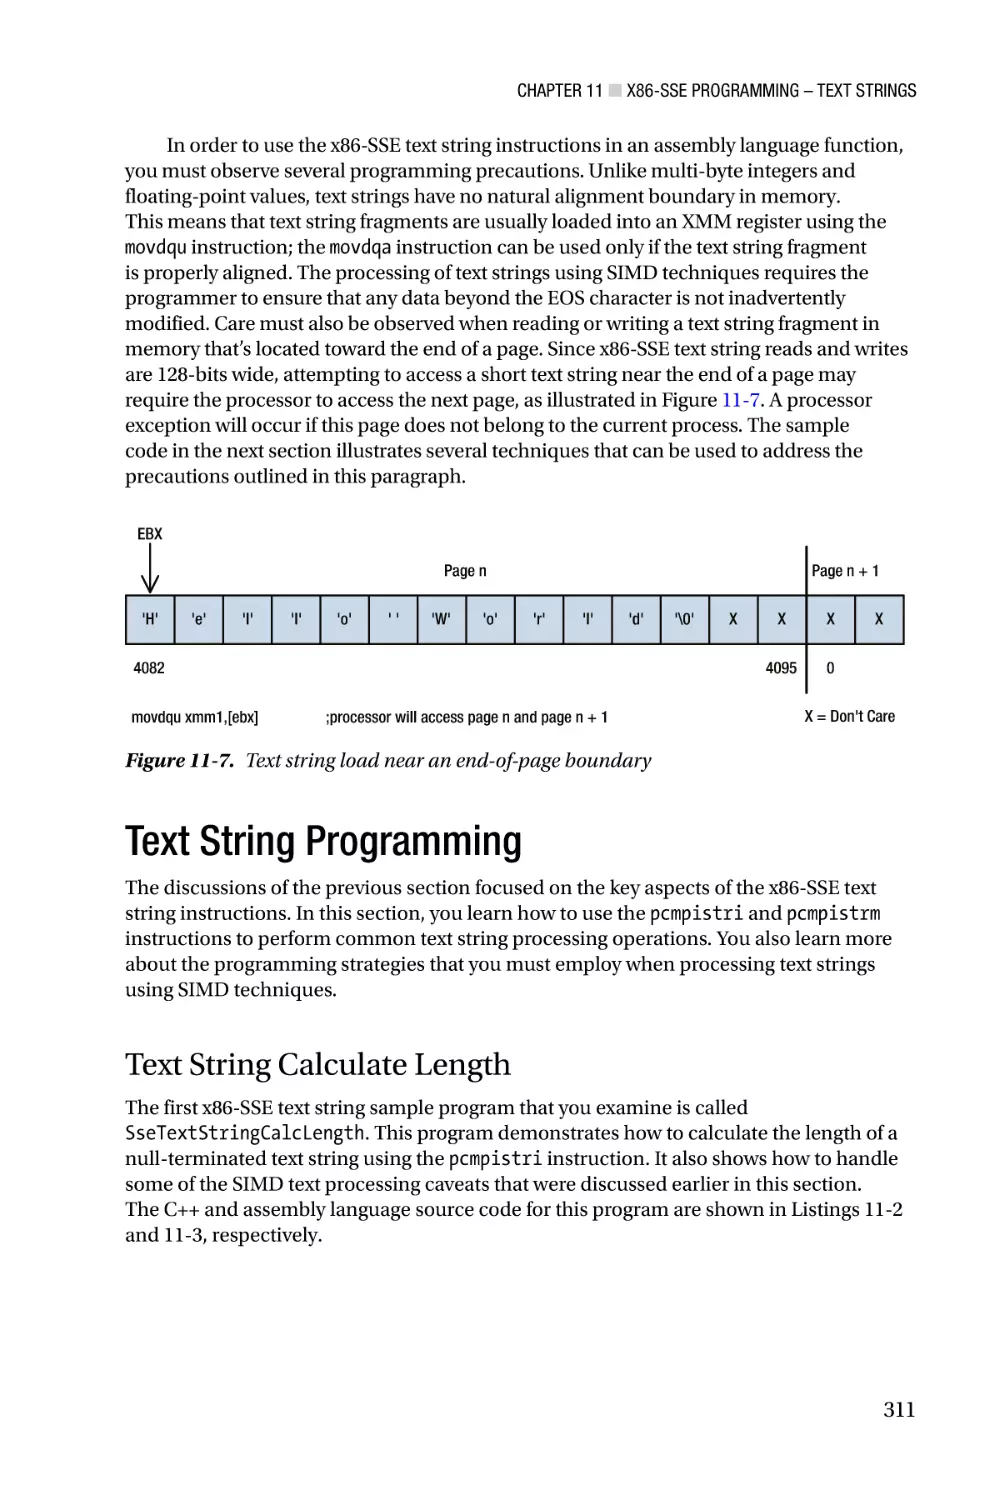 Text String Programming
Text String Calculate Length